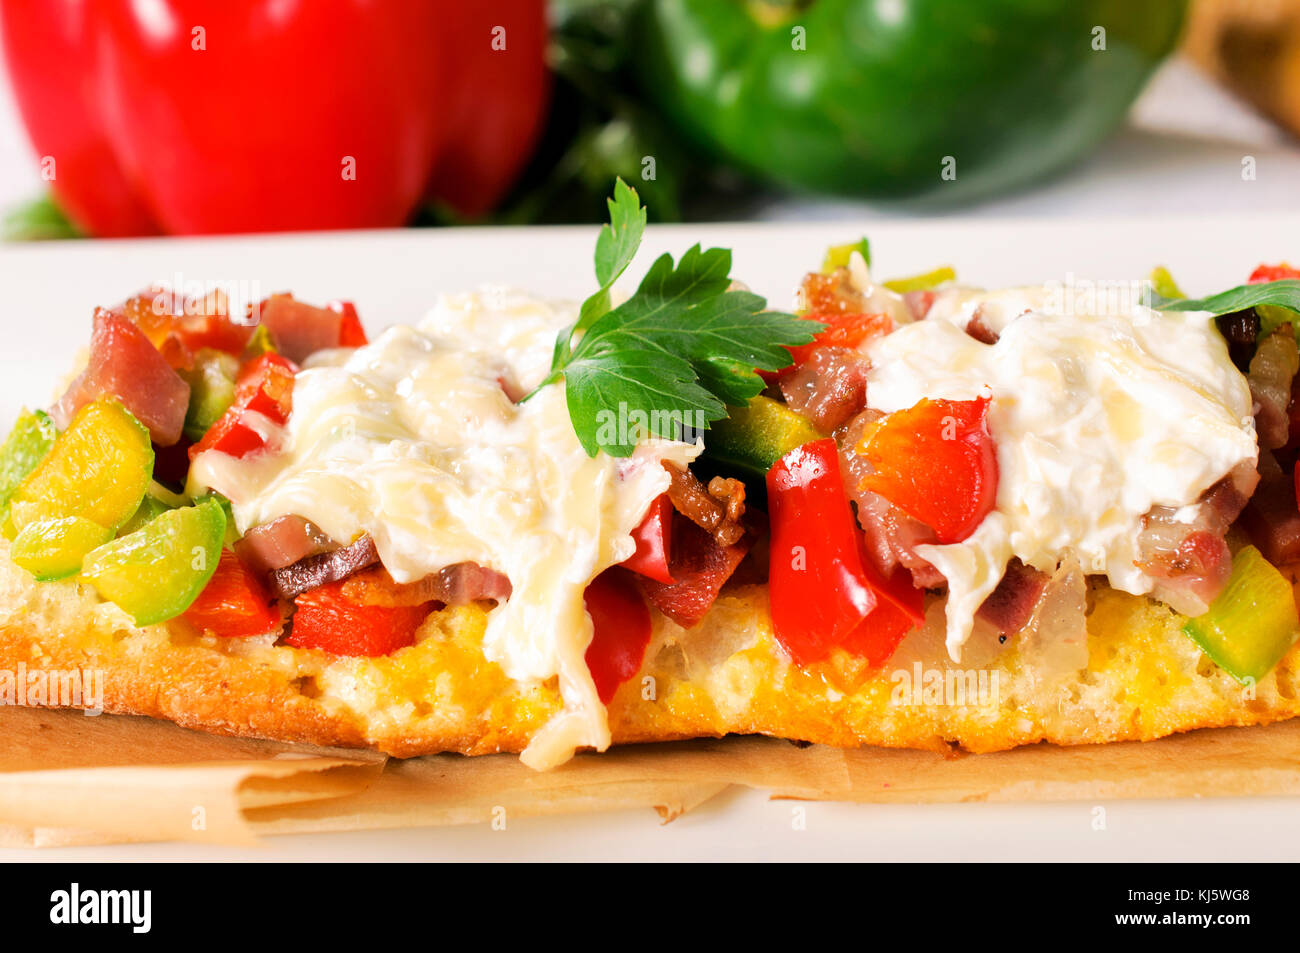 Baguette bread stuffed with meat and peppers.Selective focus in the middle Stock Photo